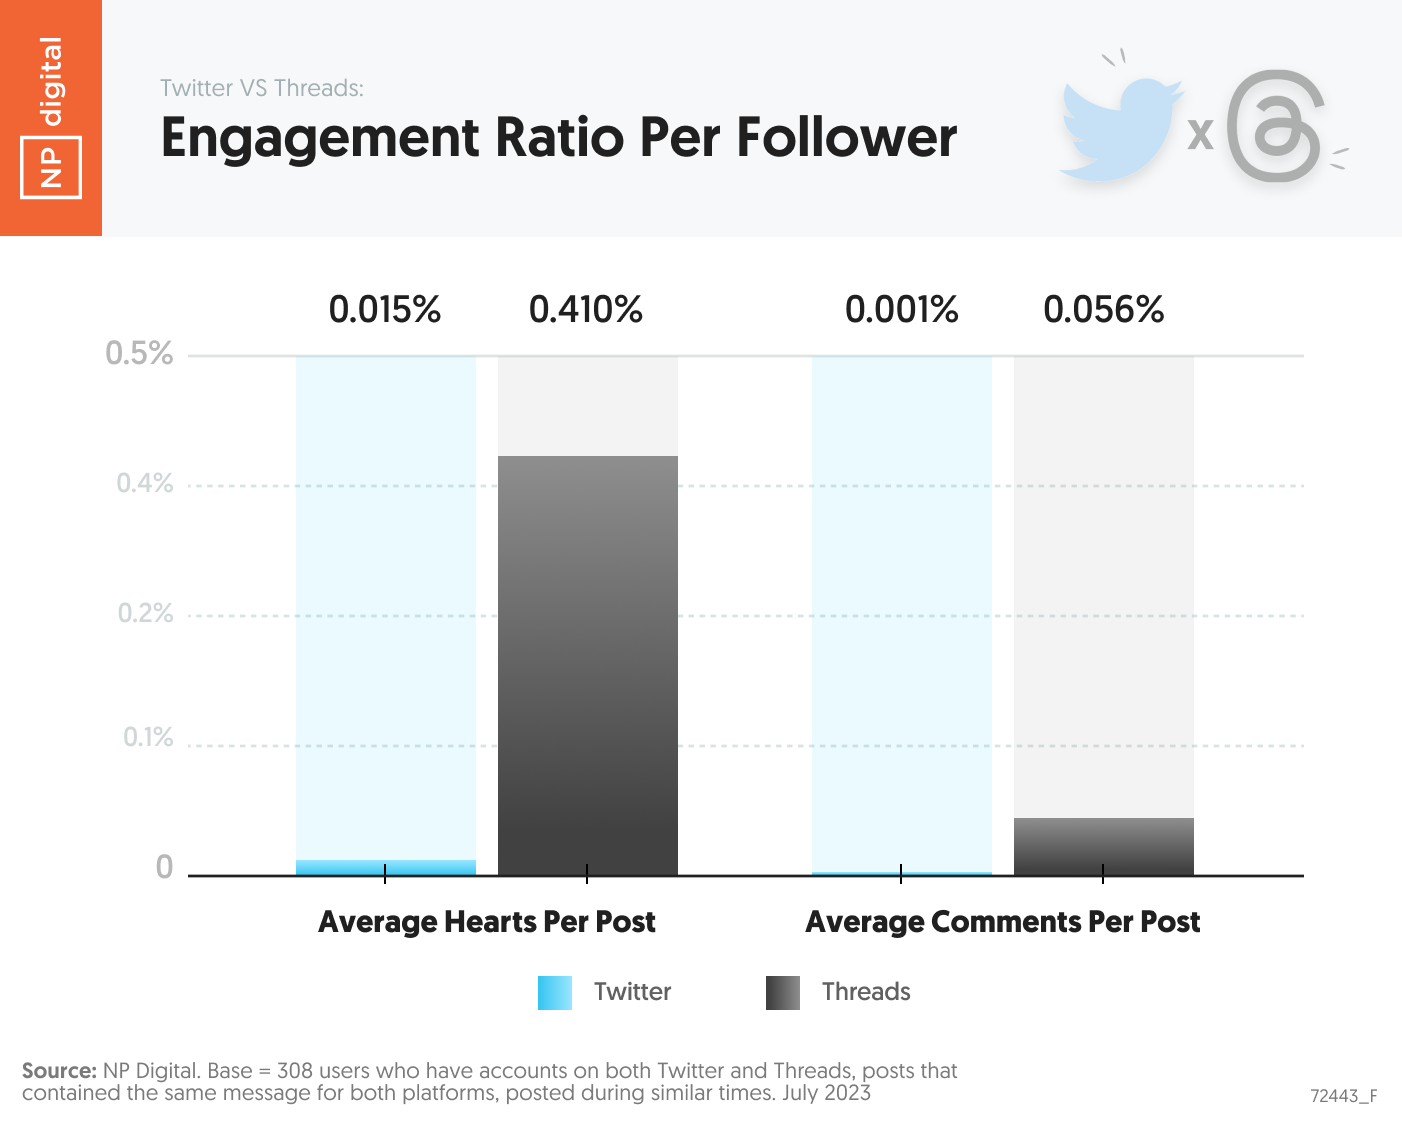 A graphic showing the engagement ratio per follow versus Twitter and Threads